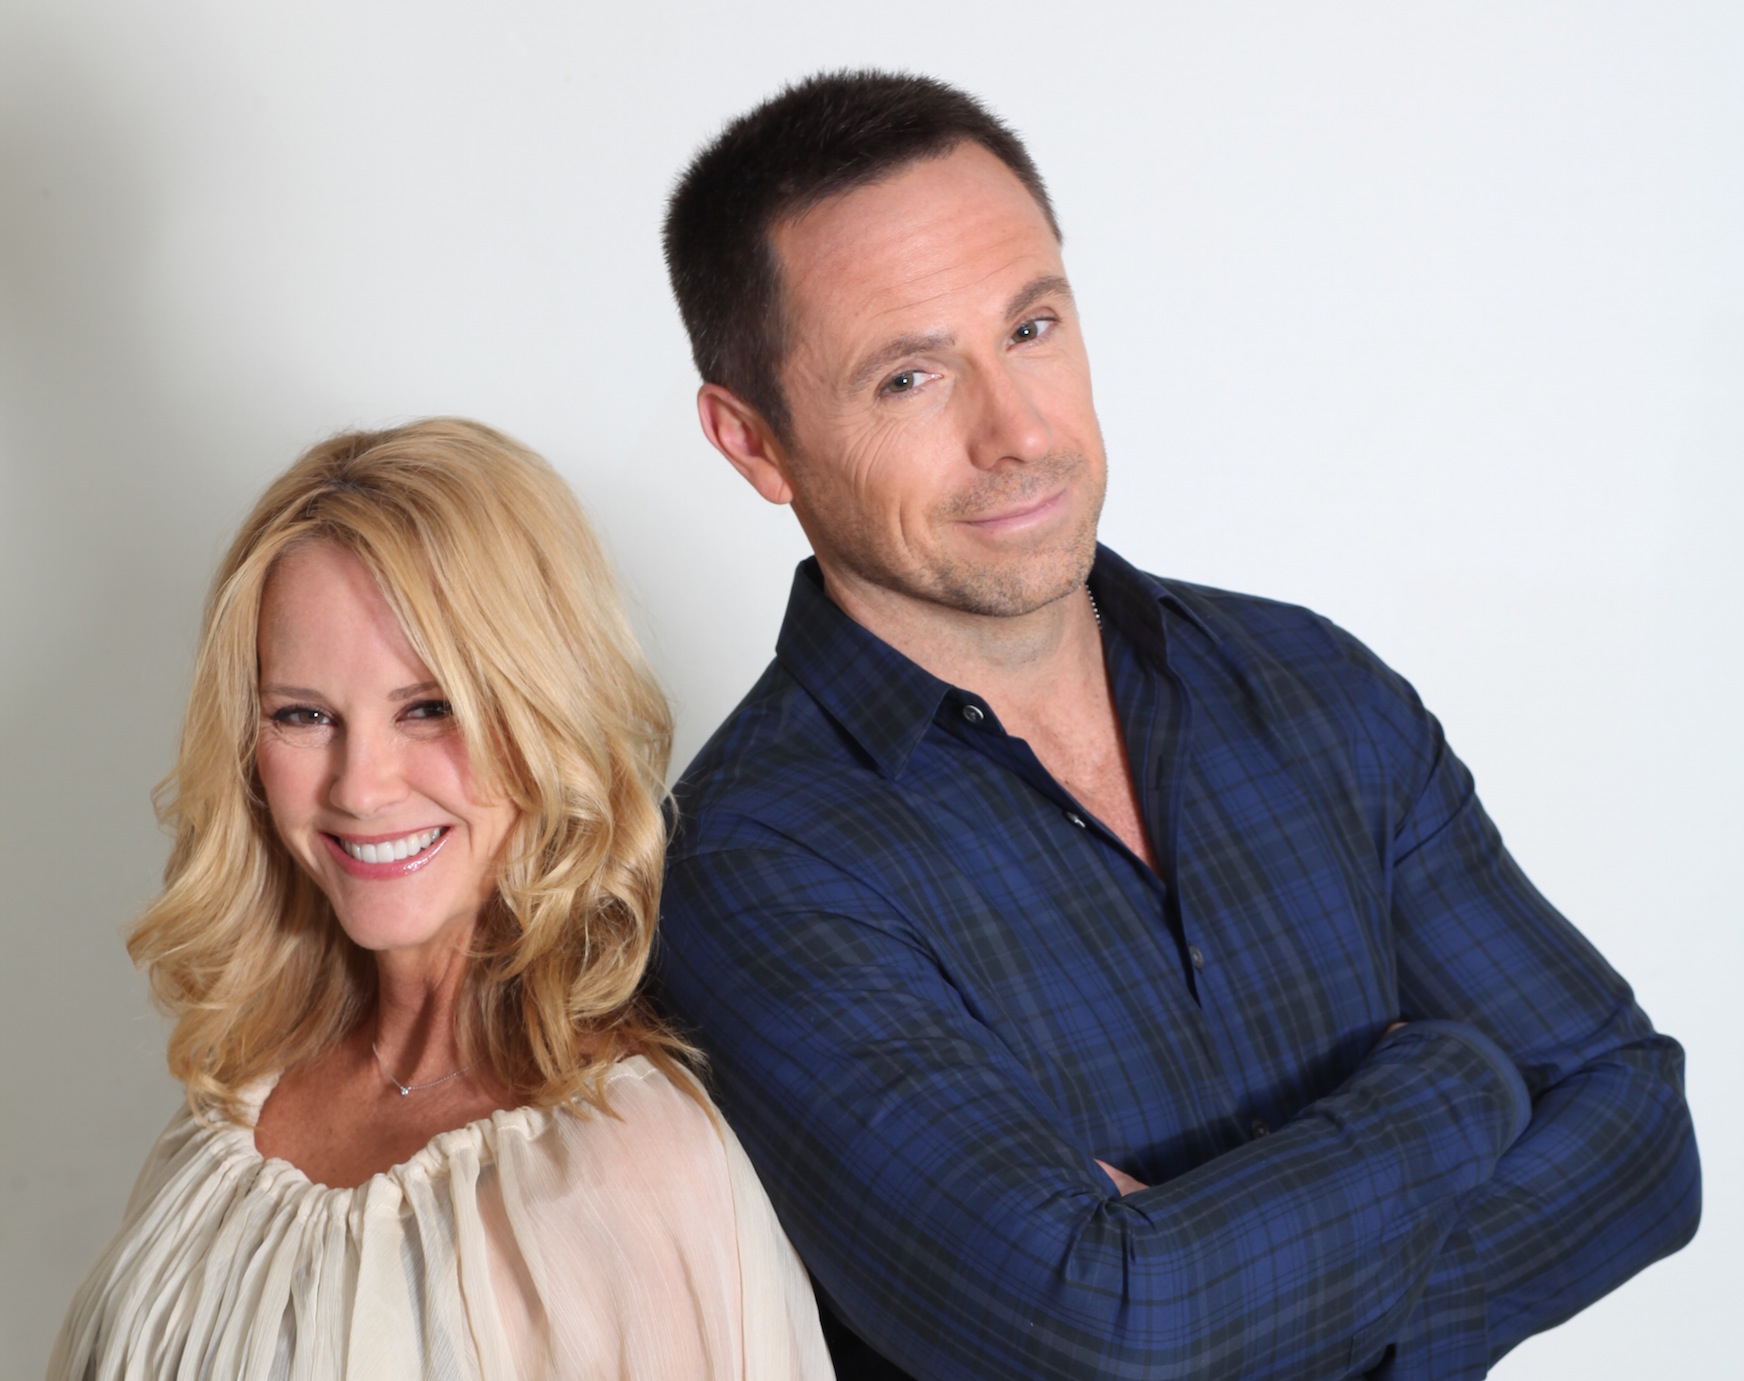 GENERAL HOSPITAL's William deVry Announces Rebecca Staab is Starring With  Alison Sweeney in the New Hallmark Channel Movie, 'The Irresistible  Blueberry Farm'! - Soaps In Depth